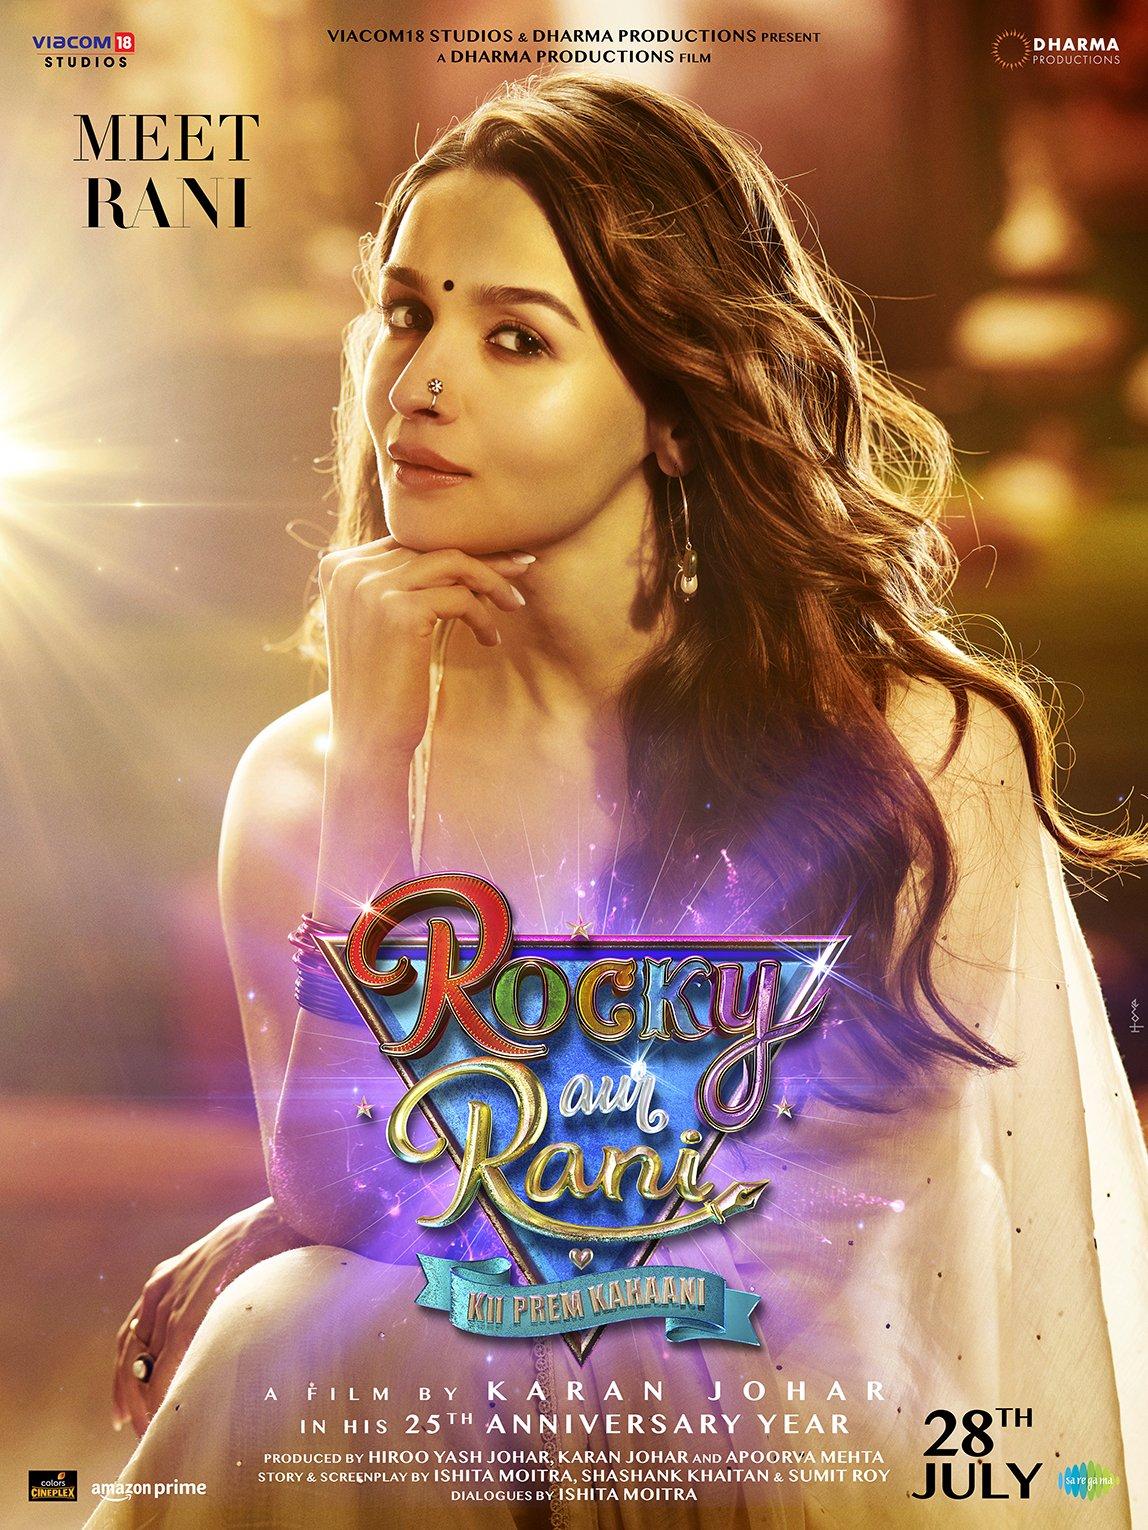 Set against the backdrop of the vibrant Indian culture, the film beautifully showcases the love that blossoms between a Bengali girl and a Punjabi boy. The storyline delves into the complexities and beauty of love that transcends cultural differences, as Rocky and Rani navigate through the various challenges that arise from their diverse backgrounds.